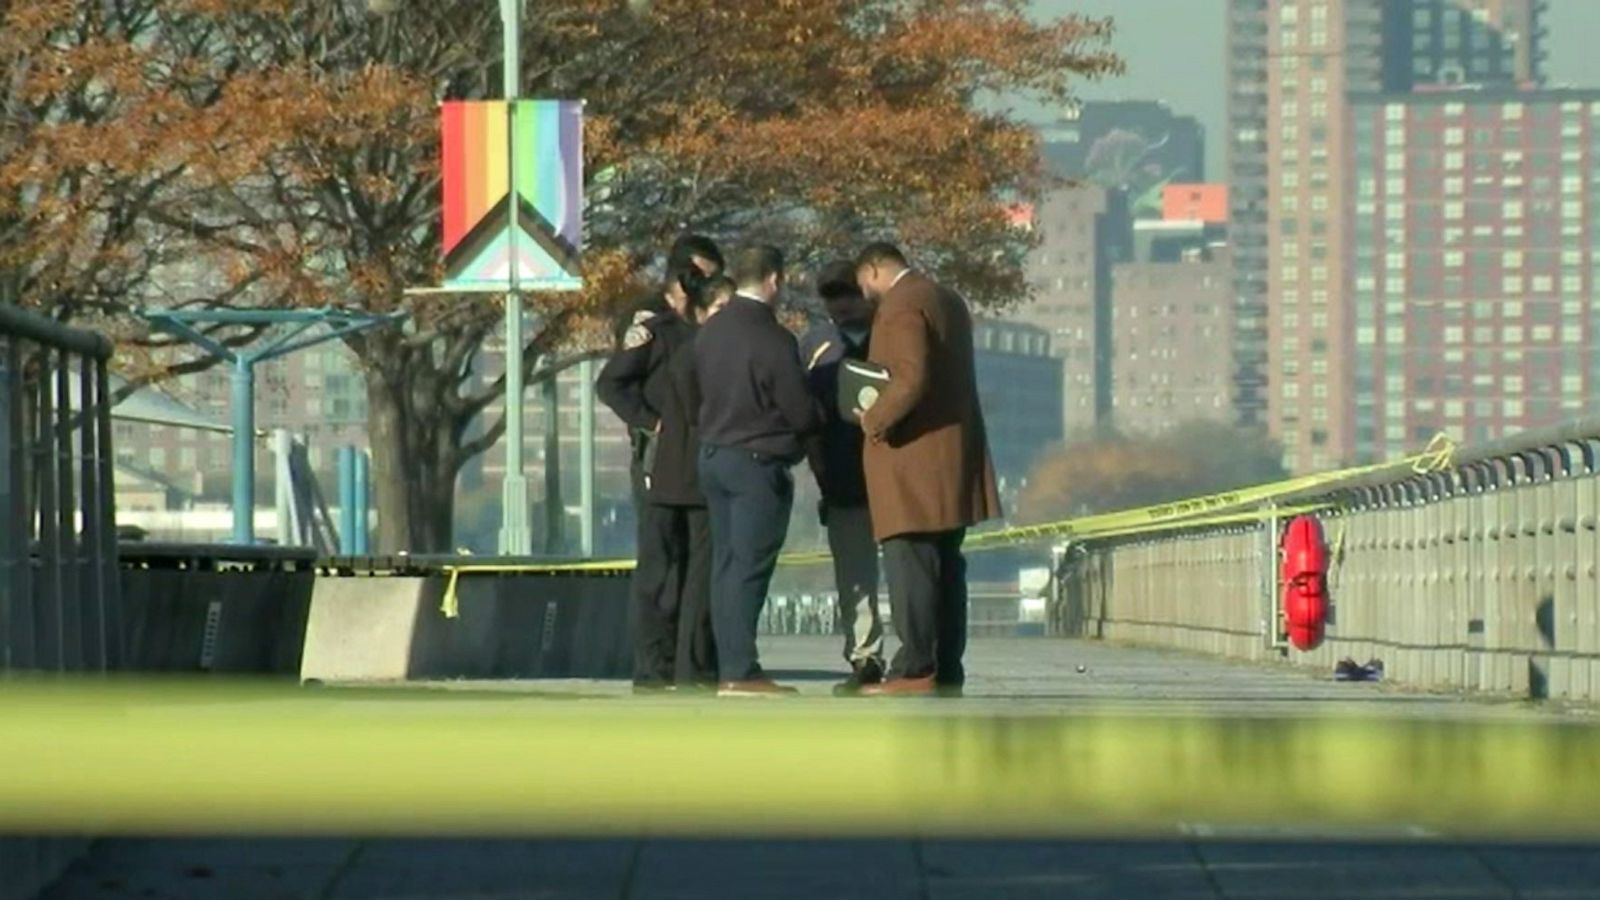 43-year-old woman raped while jogging in Manhattan: Police - ABC News